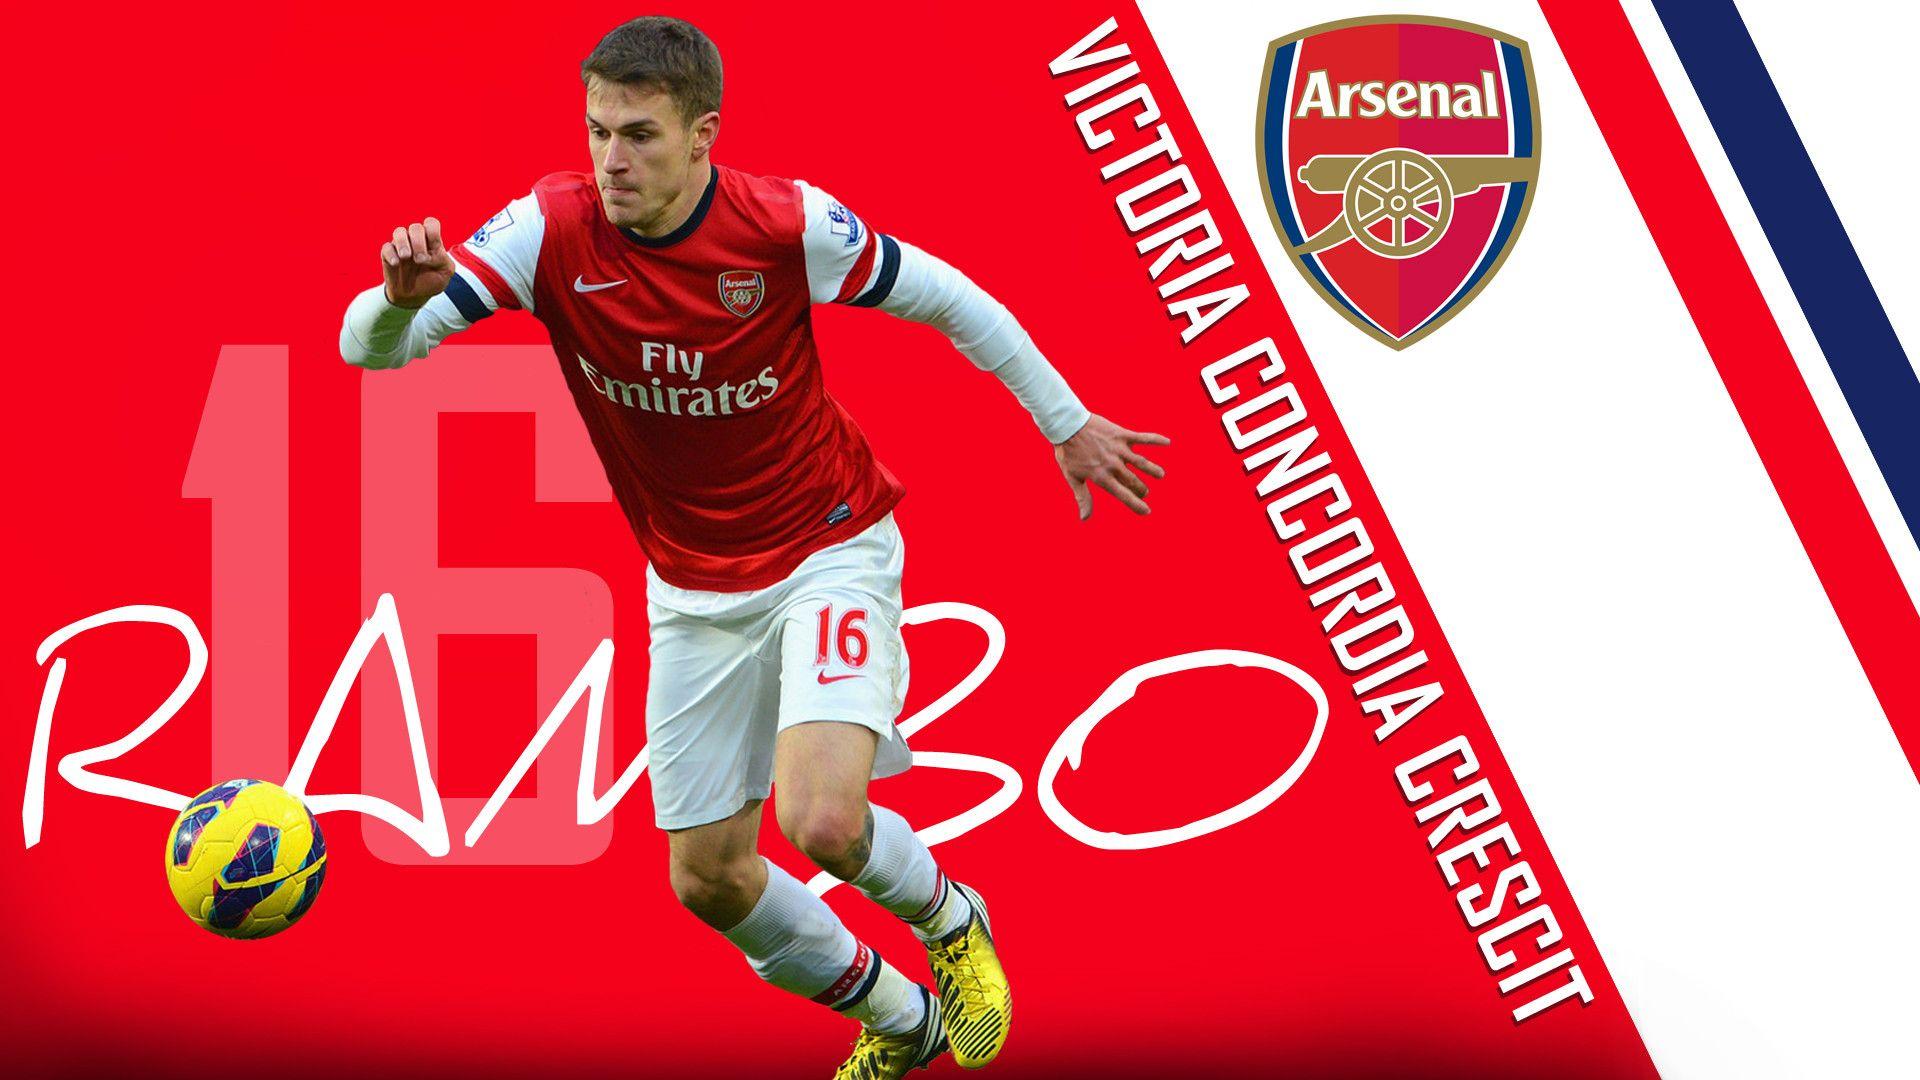 In the themes of the week here is my Aaron Ramsey wallpaper